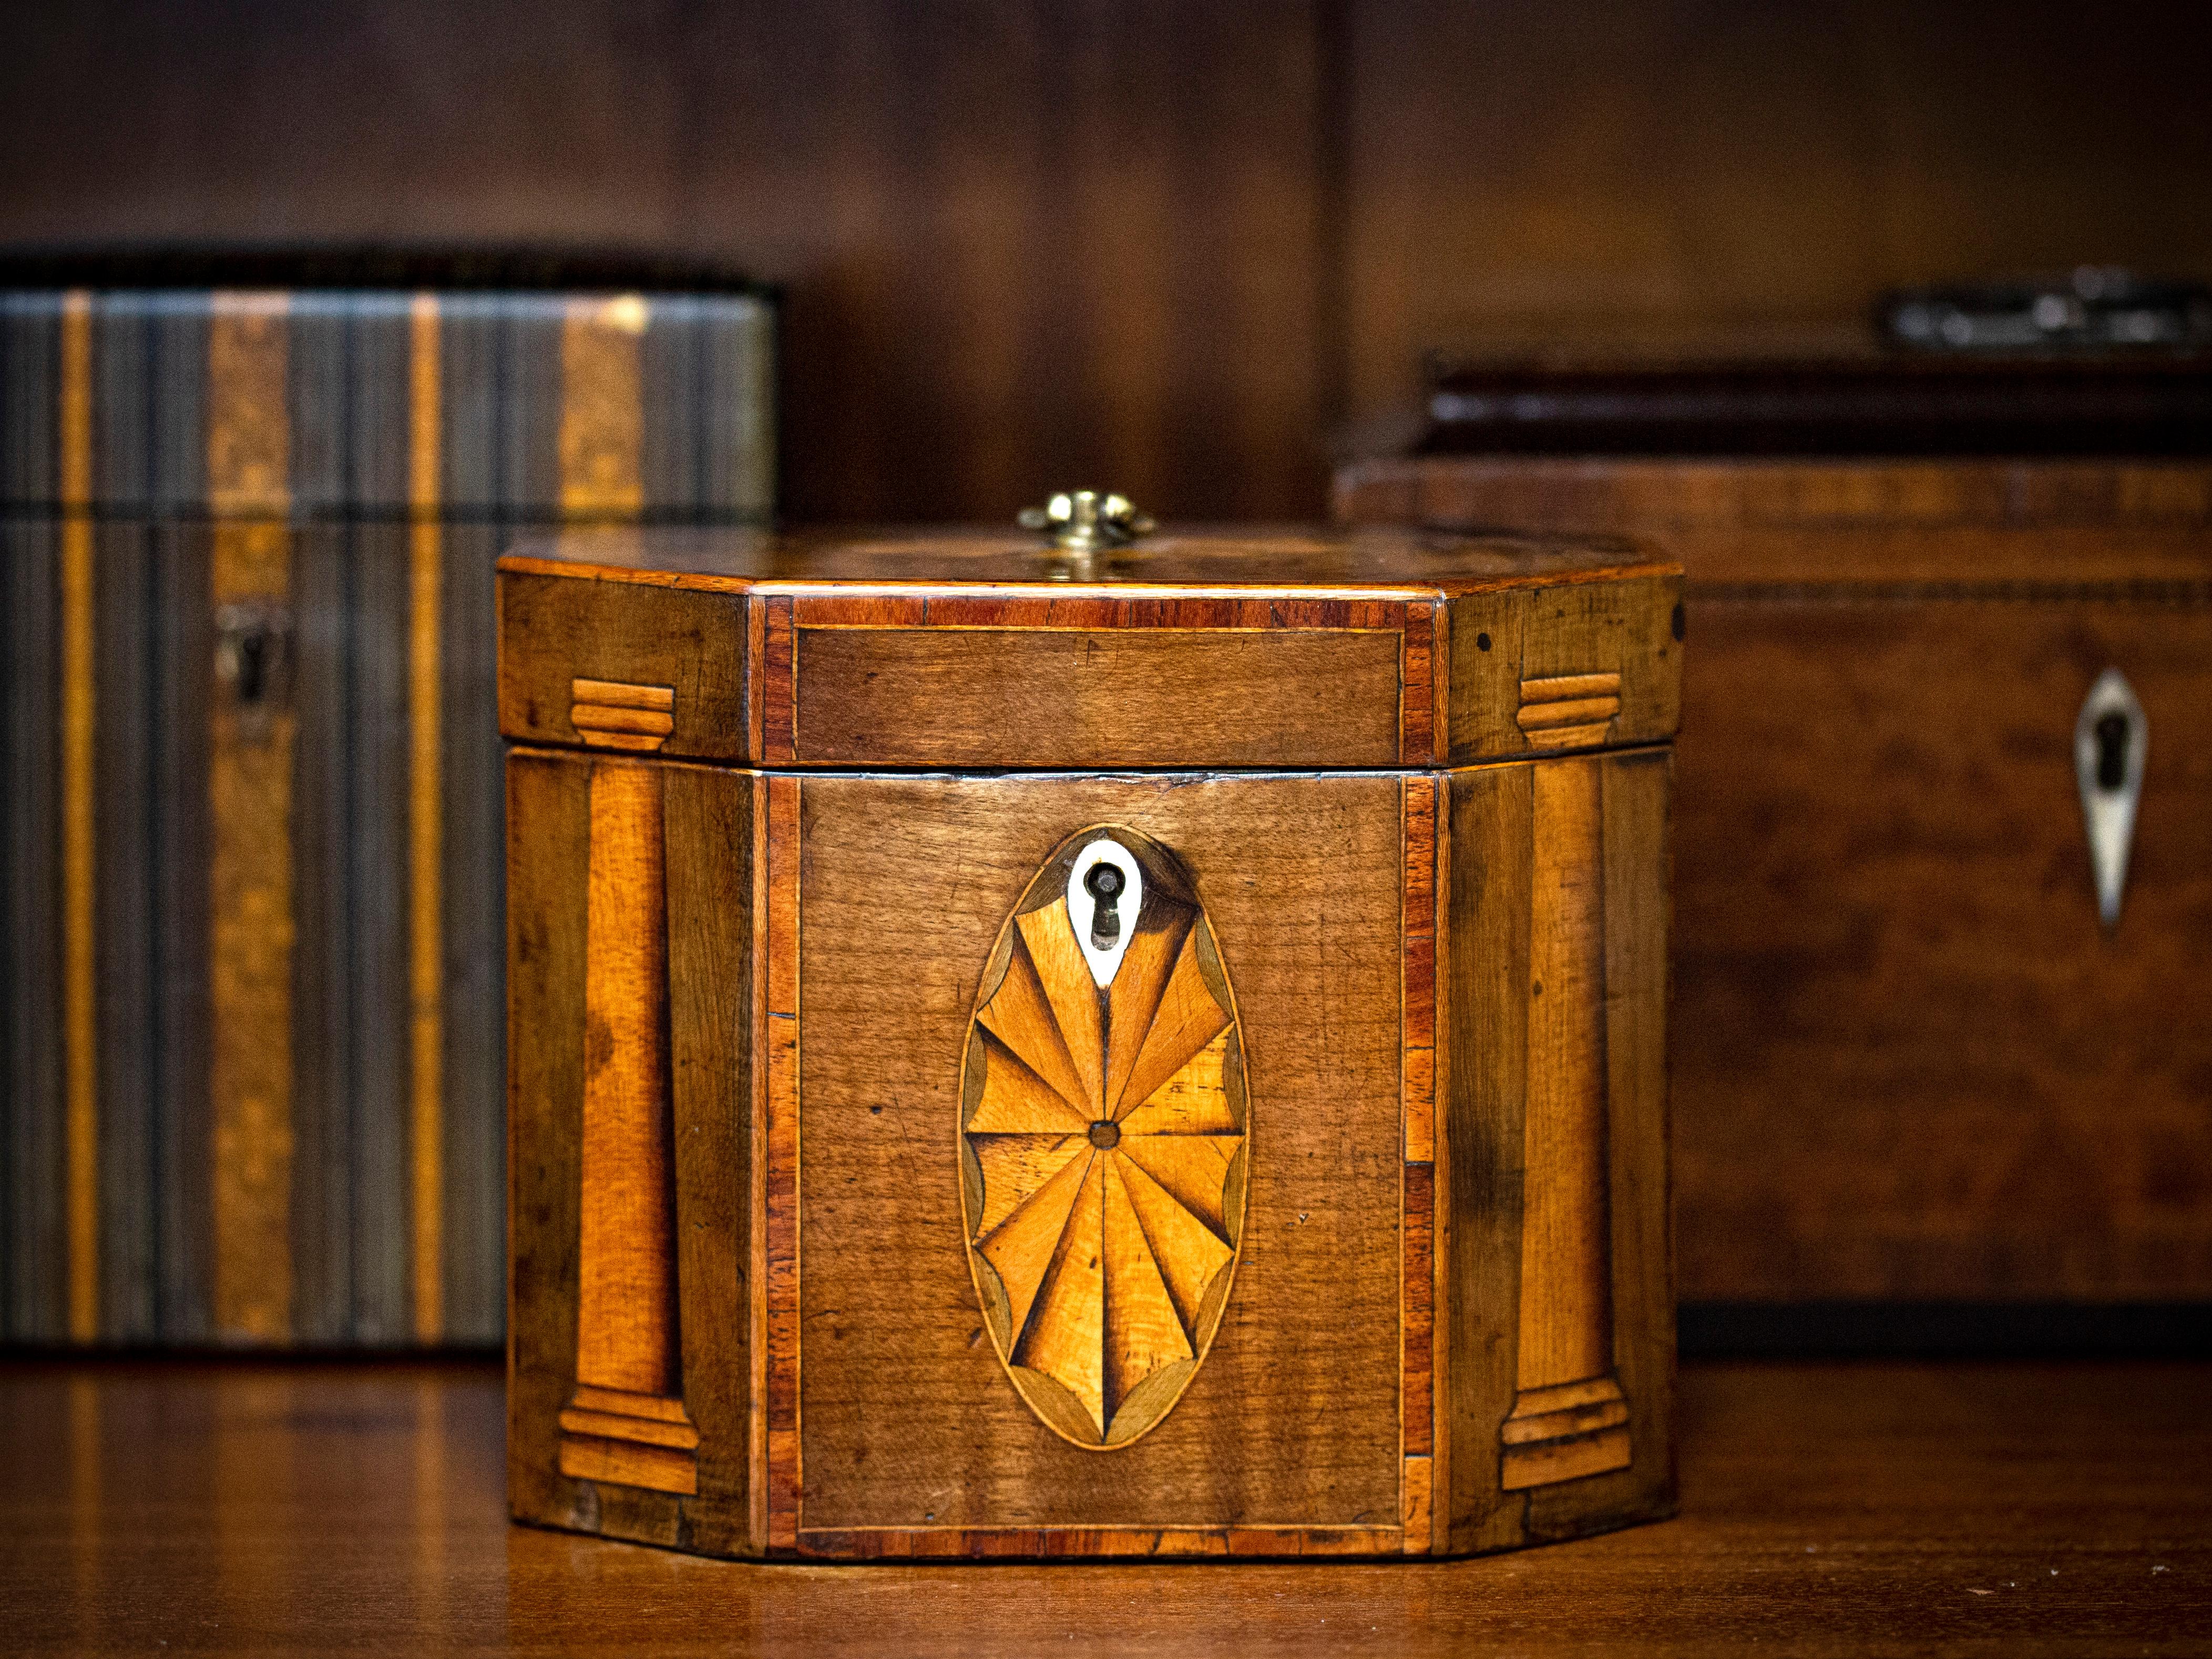 With Tuscan Columns & Fan Inlay.

From our Tea Caddy collection, we are pleased to offer this Georgian Harewood Tea Caddy. The Tea Caddy of octagonal shape with a Harewood veneer exterior and crossbanded Tulipwood with Boxwood edging. The front